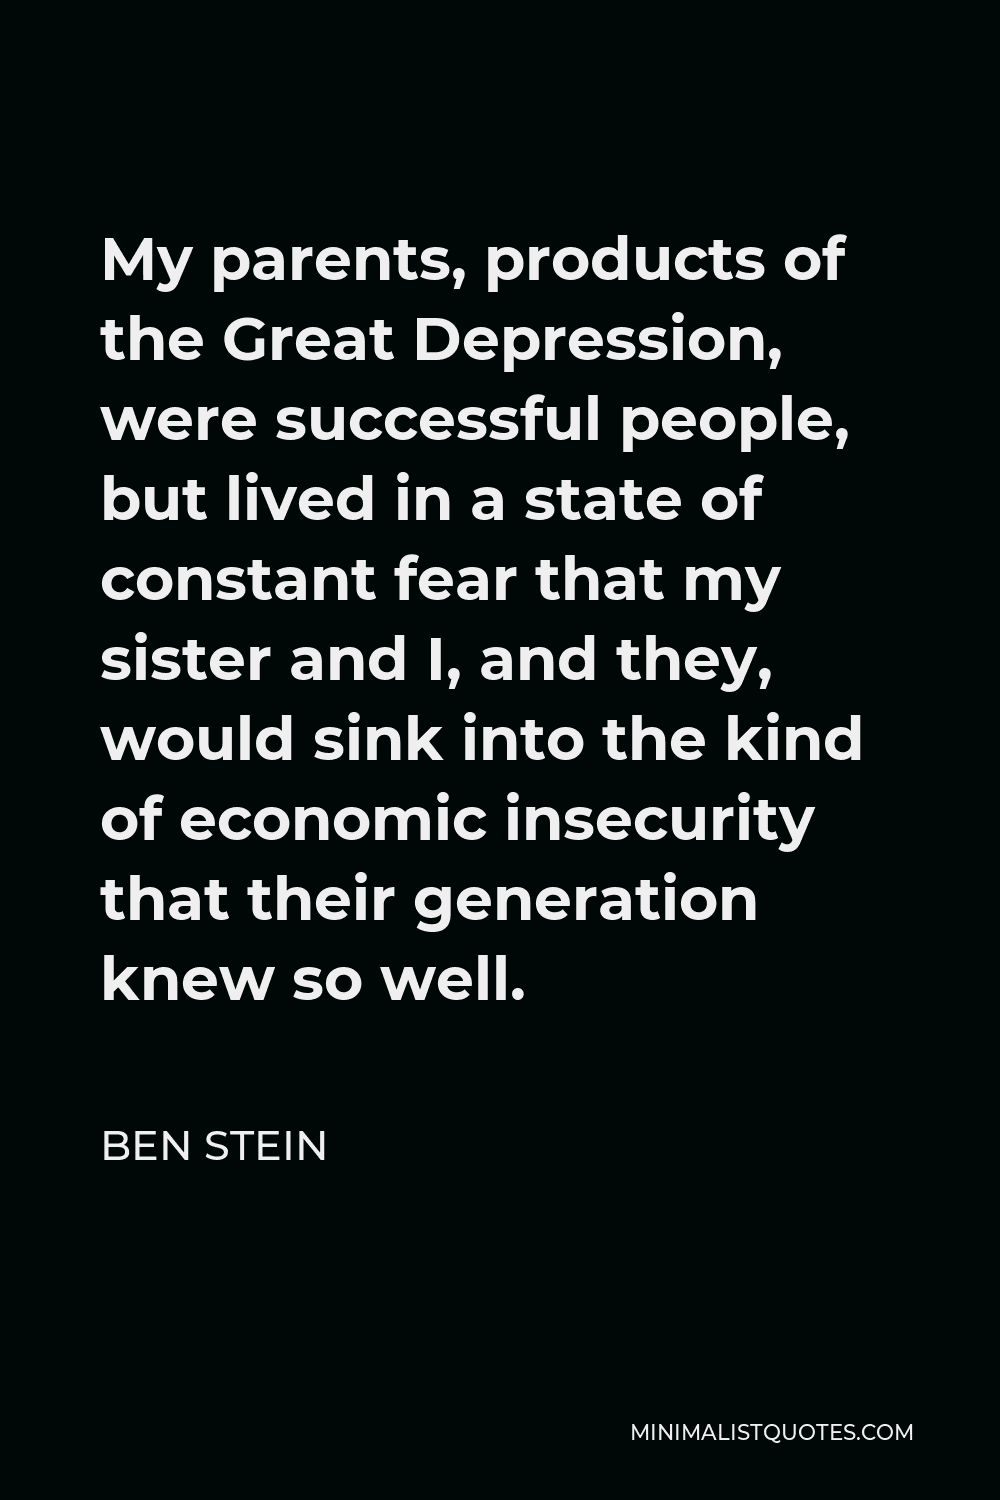 Ben Stein Quote - My parents, products of the Great Depression, were successful people, but lived in a state of constant fear that my sister and I, and they, would sink into the kind of economic insecurity that their generation knew so well.